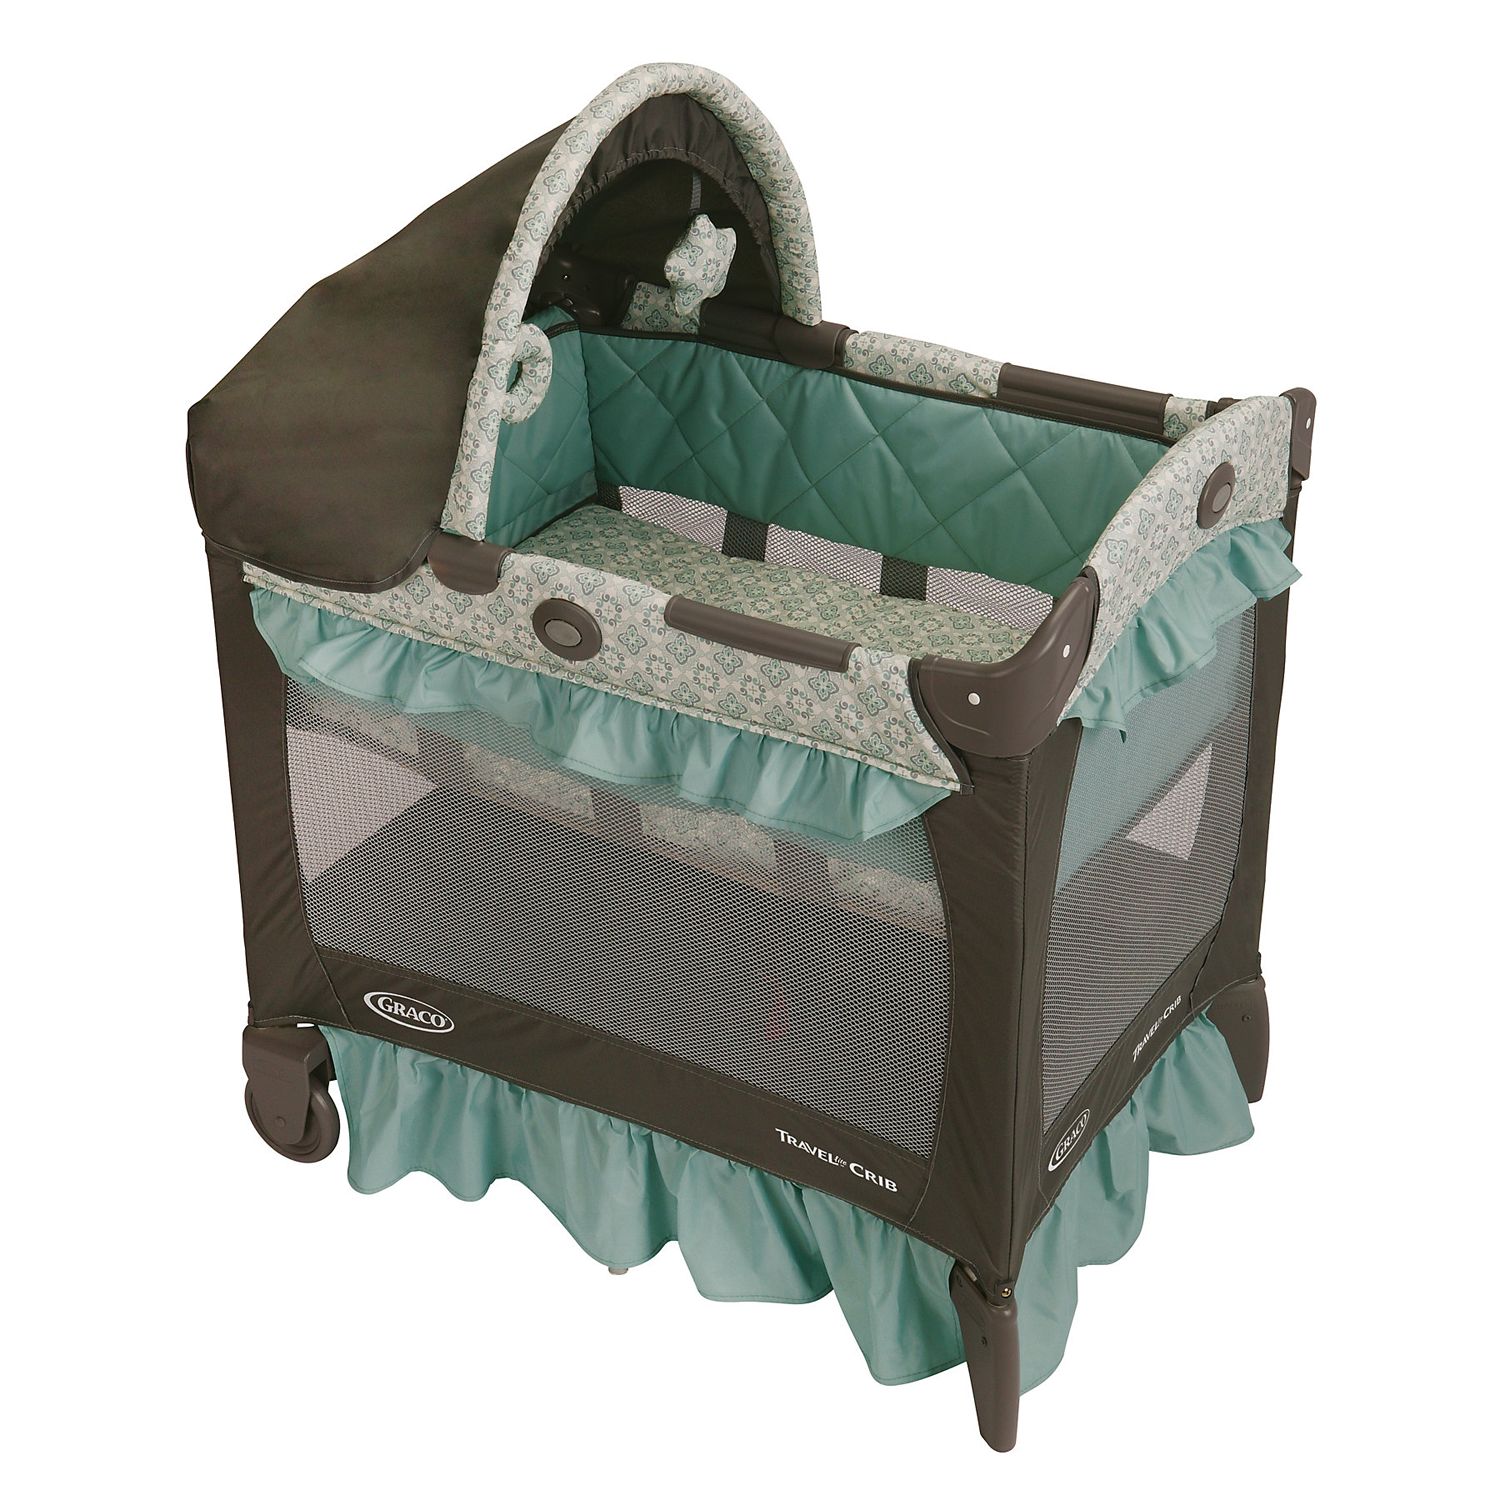 pack and play travel crib